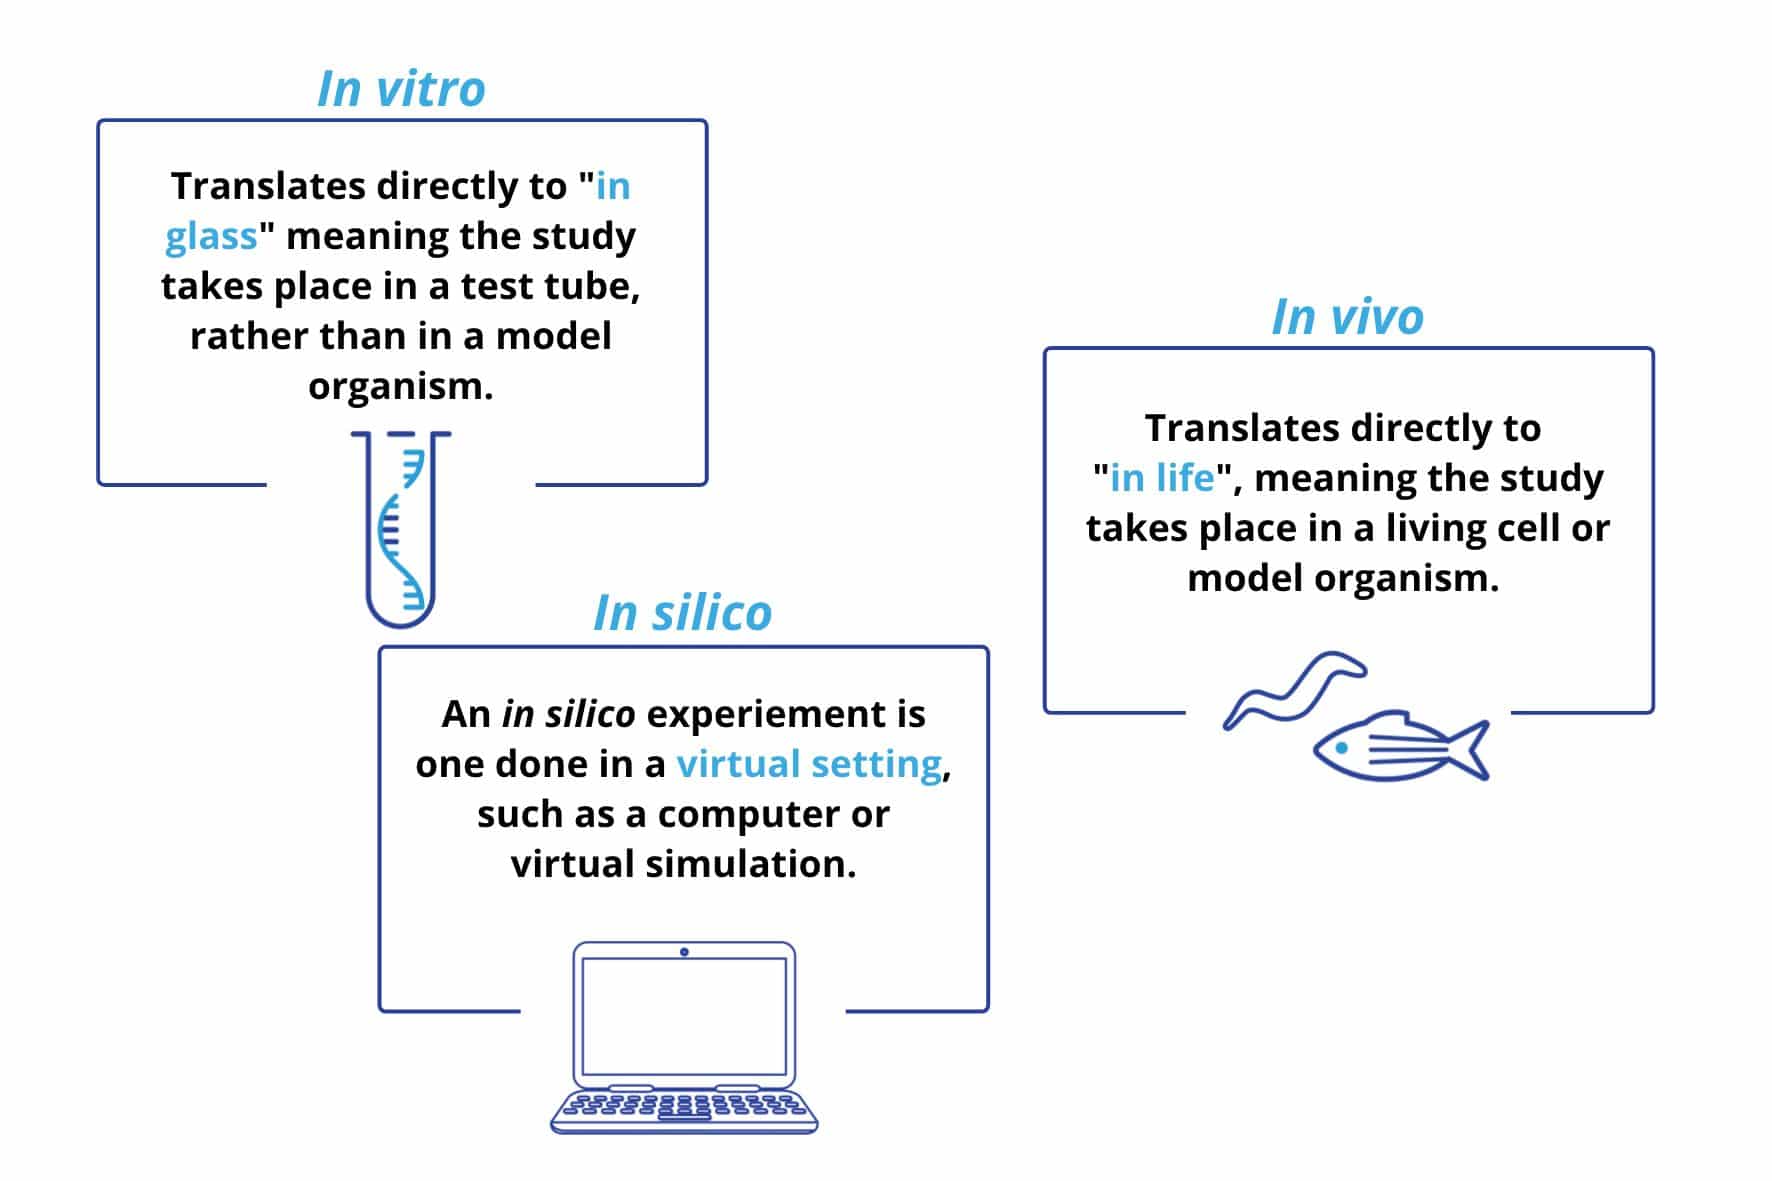 In vitro: translates directly to in glass meaning the study takes place in a test tube, rather than in a model organism